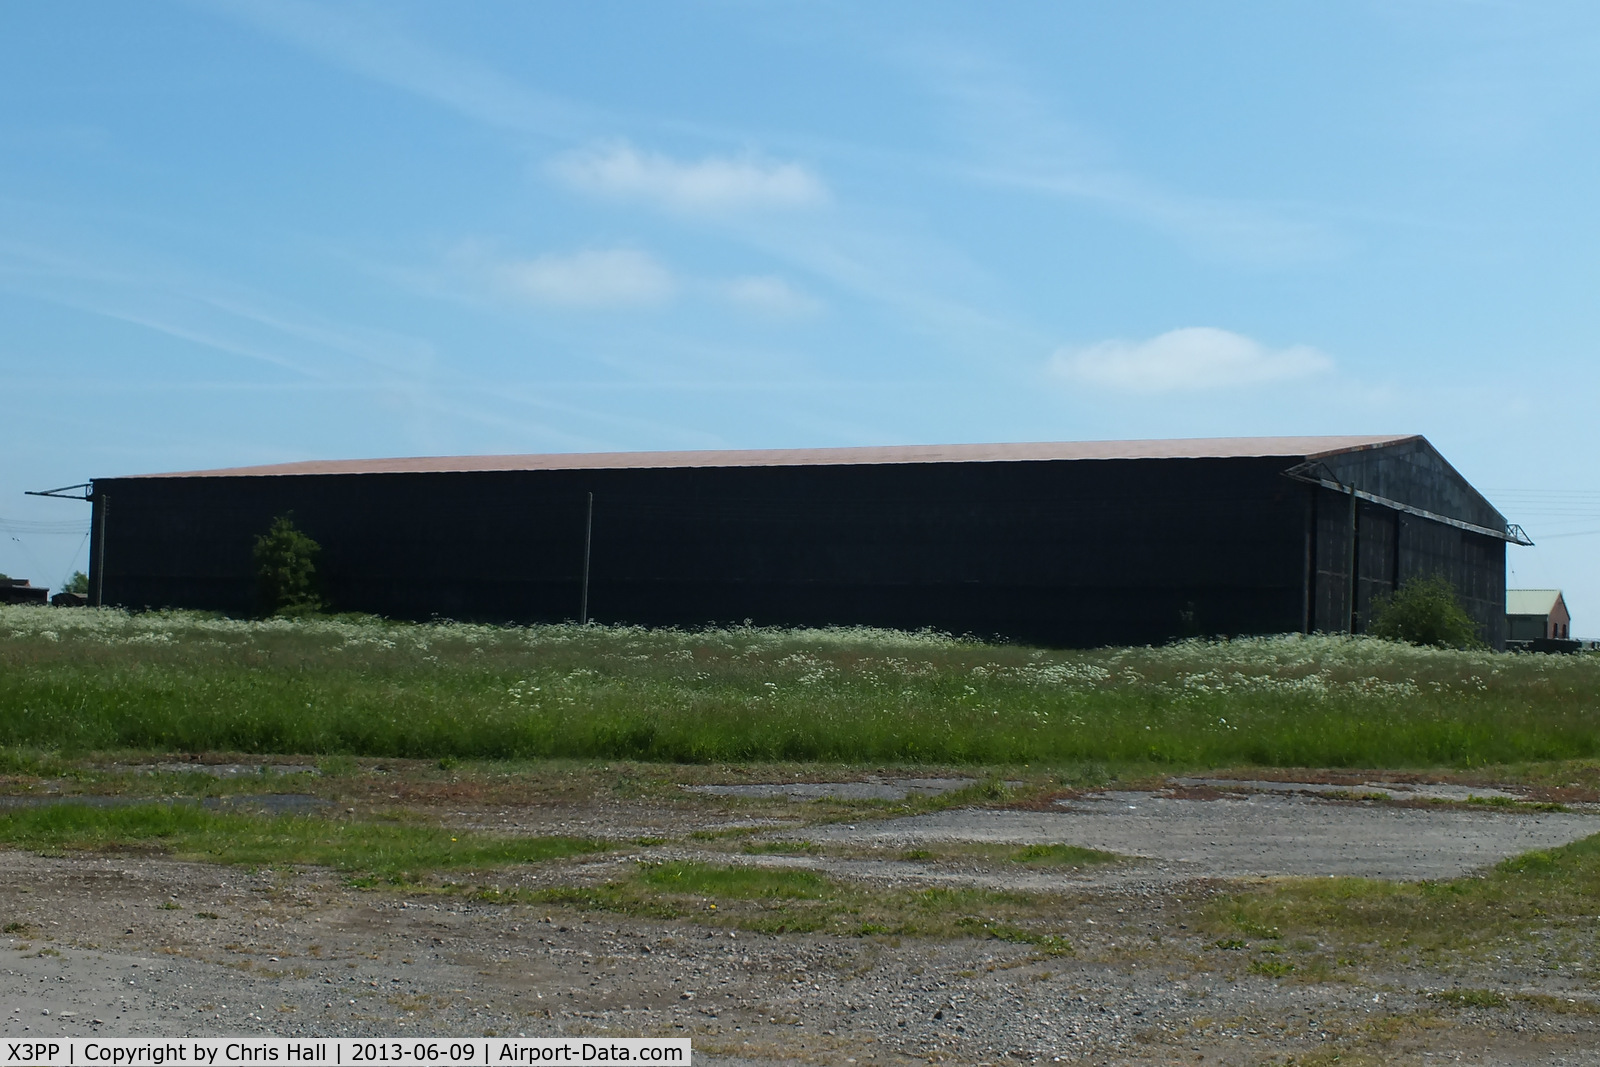 X3PP Airport - one of four surviving T2 hangars at the former RAF Peplow, which was also know as:	HMS Godwit II / RAF Child's Ercall / RNAS Peplow. It was in use between 1941 and 1949